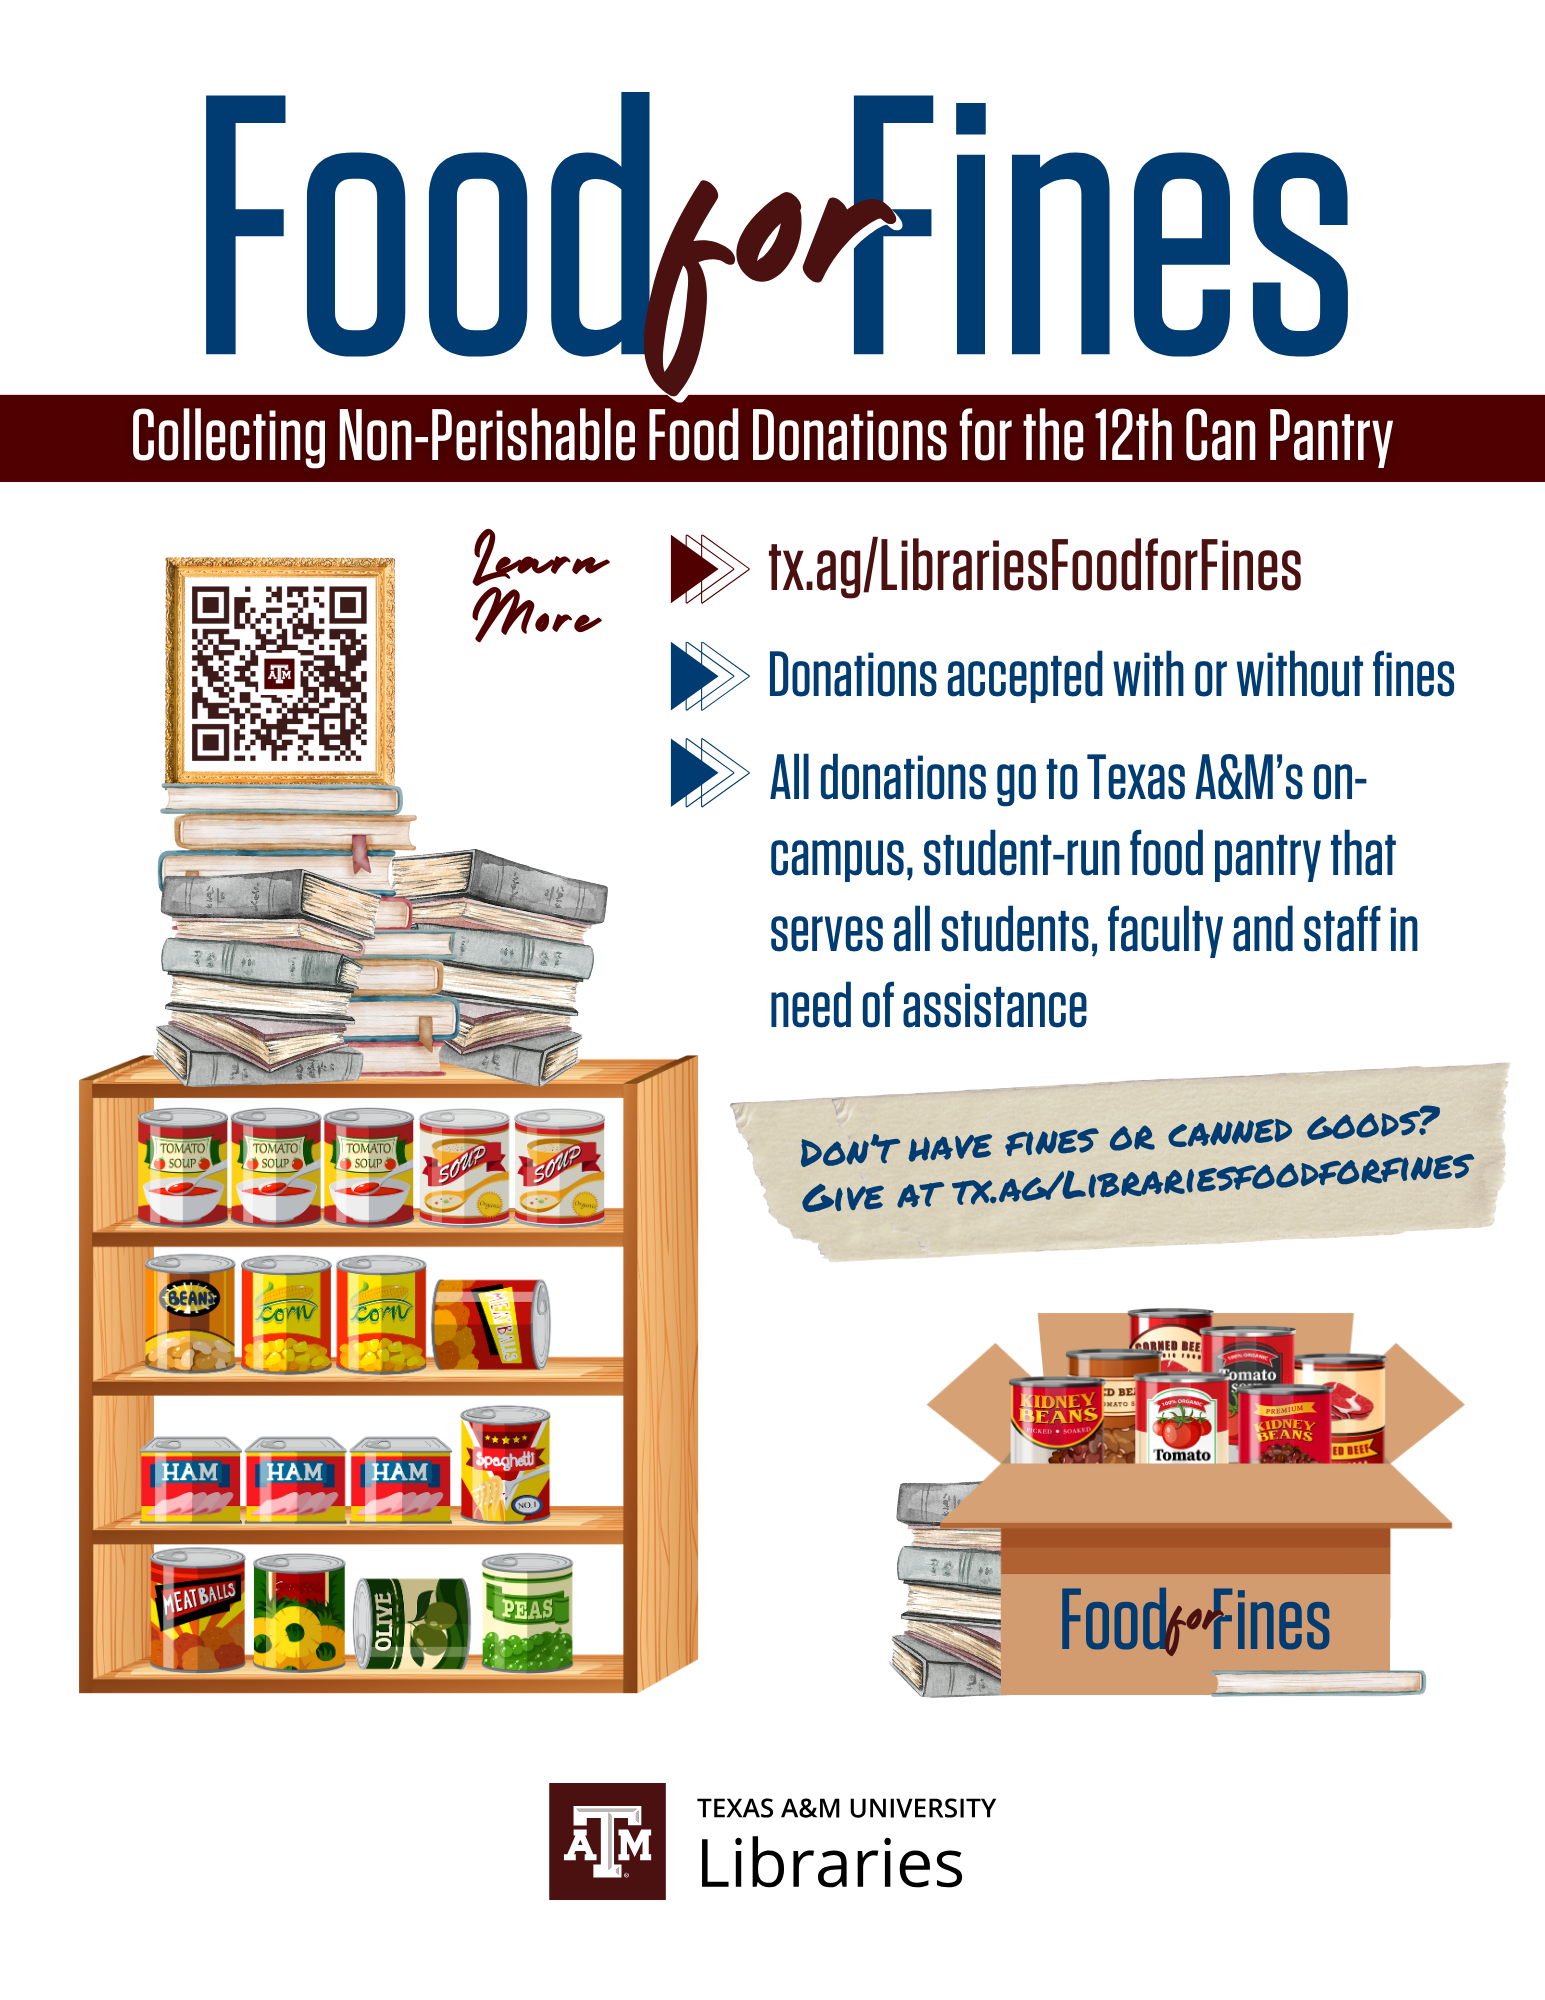 Food for Fines. Collecting non-perishable food donations for the 12th Can Pantry. Learn more. tx.ag/LibrariesFoodForFines. Donations accepted with or without fines. All donations go to Texas A&M's on-campus, student-run food pantry that serves all students, faculty and staff in of assistance